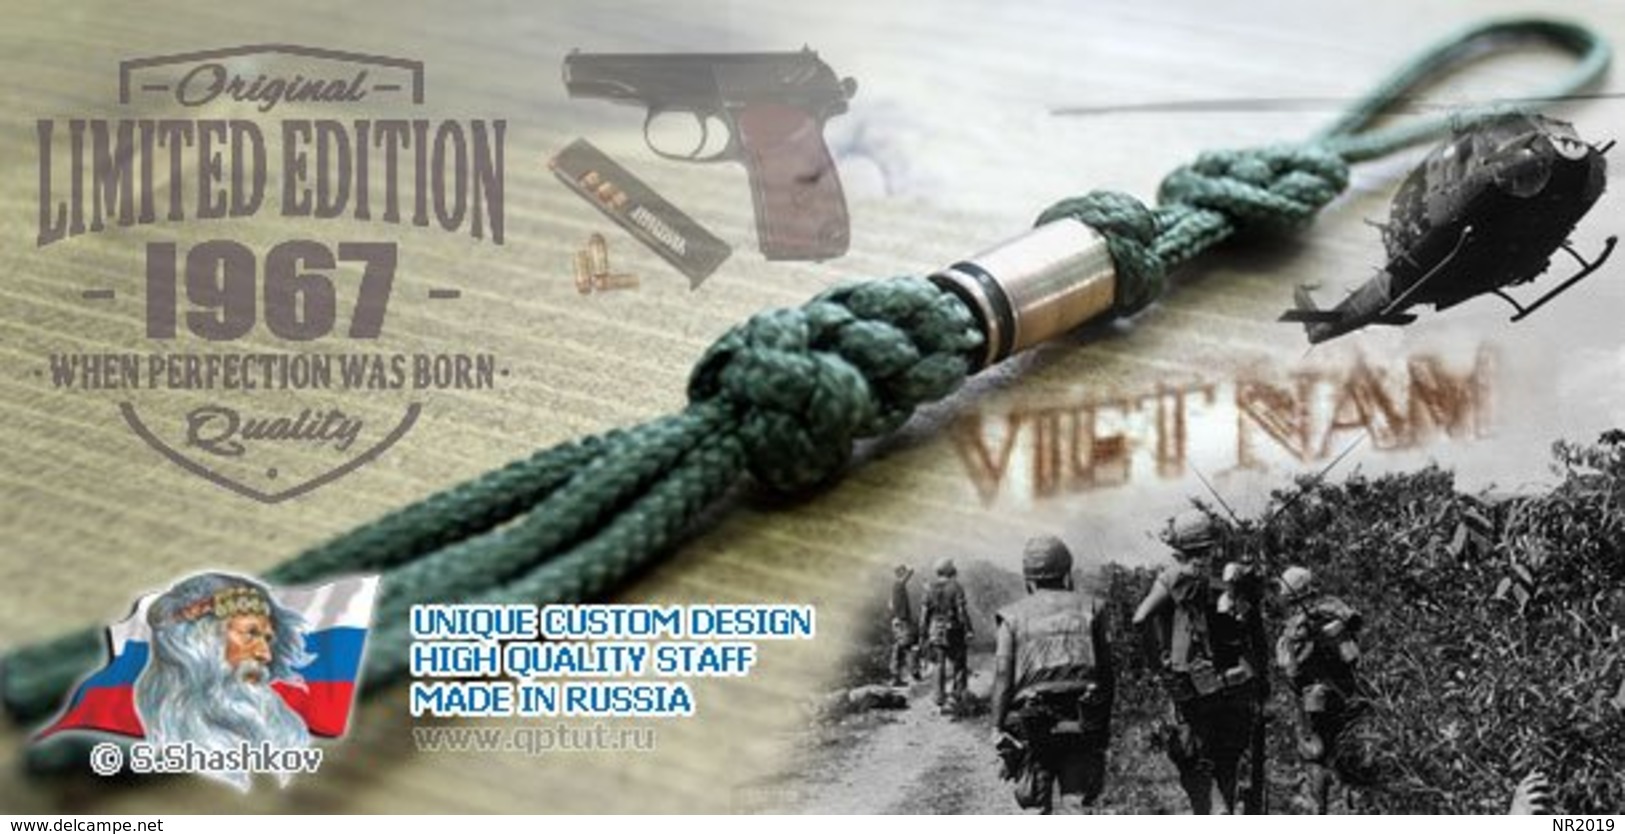 Paracord Lanyard For Knife - Limited Edition - "1967" - Uniforms